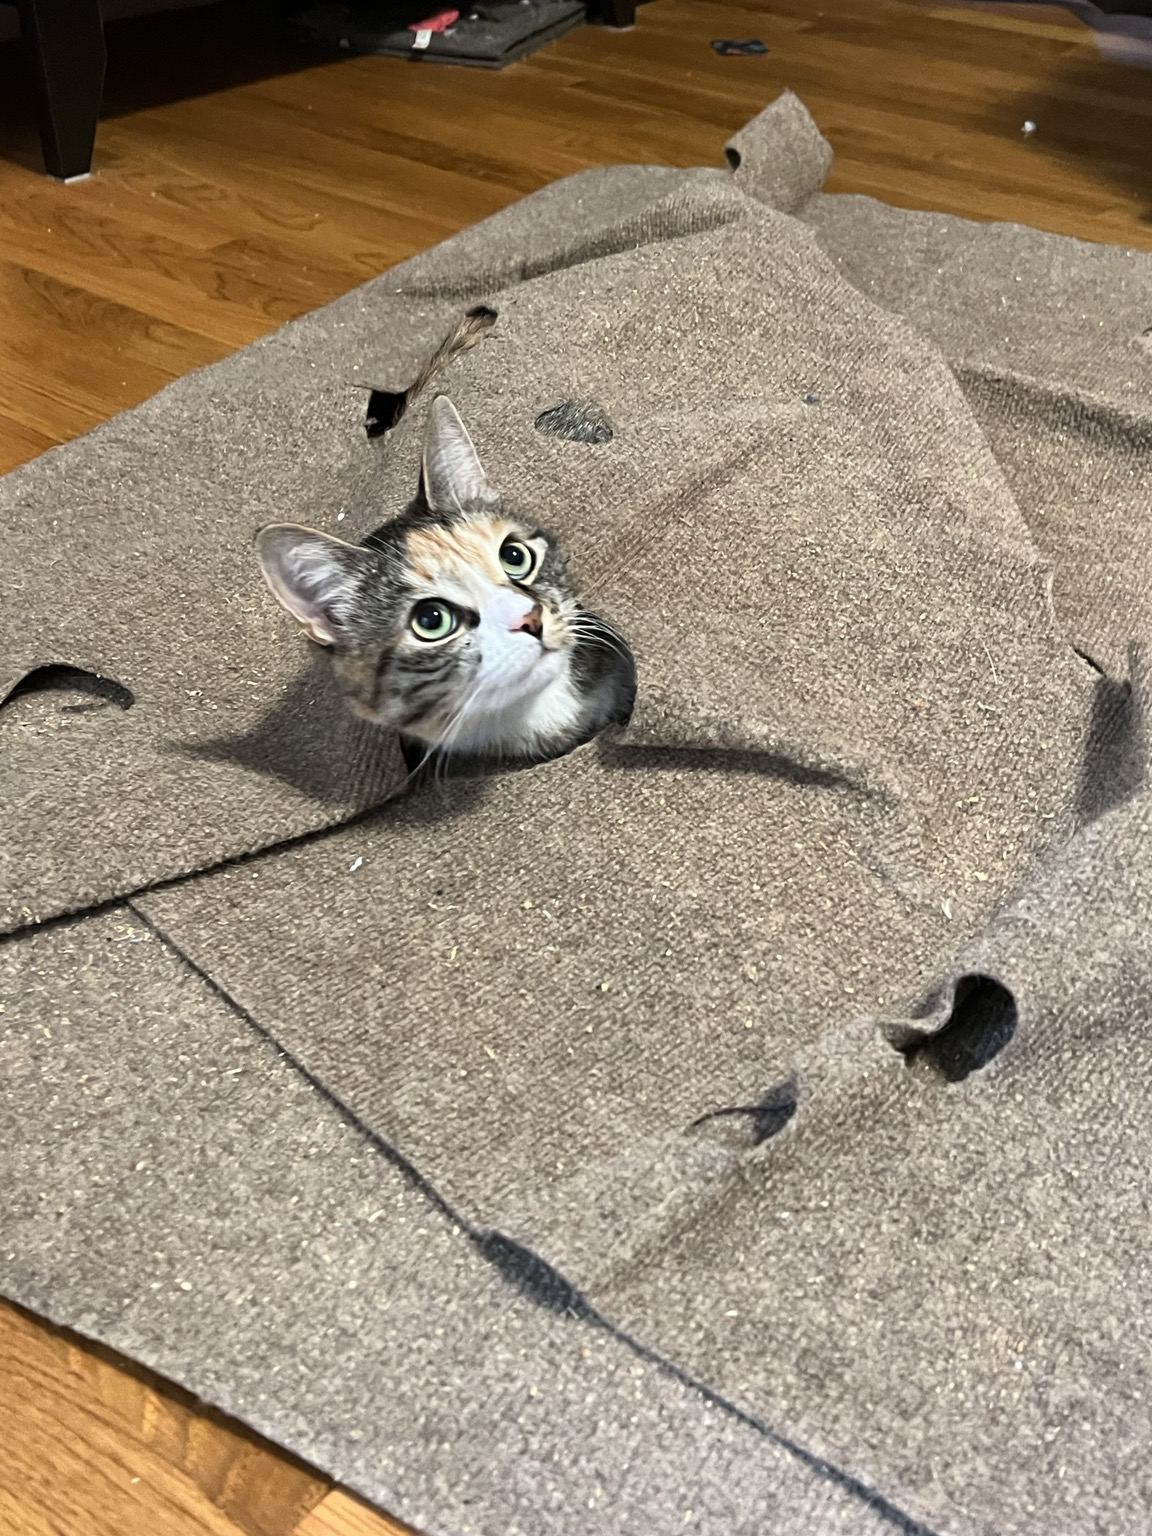 A multicolored kitty pokes her head out of a hole in a cat toy rug